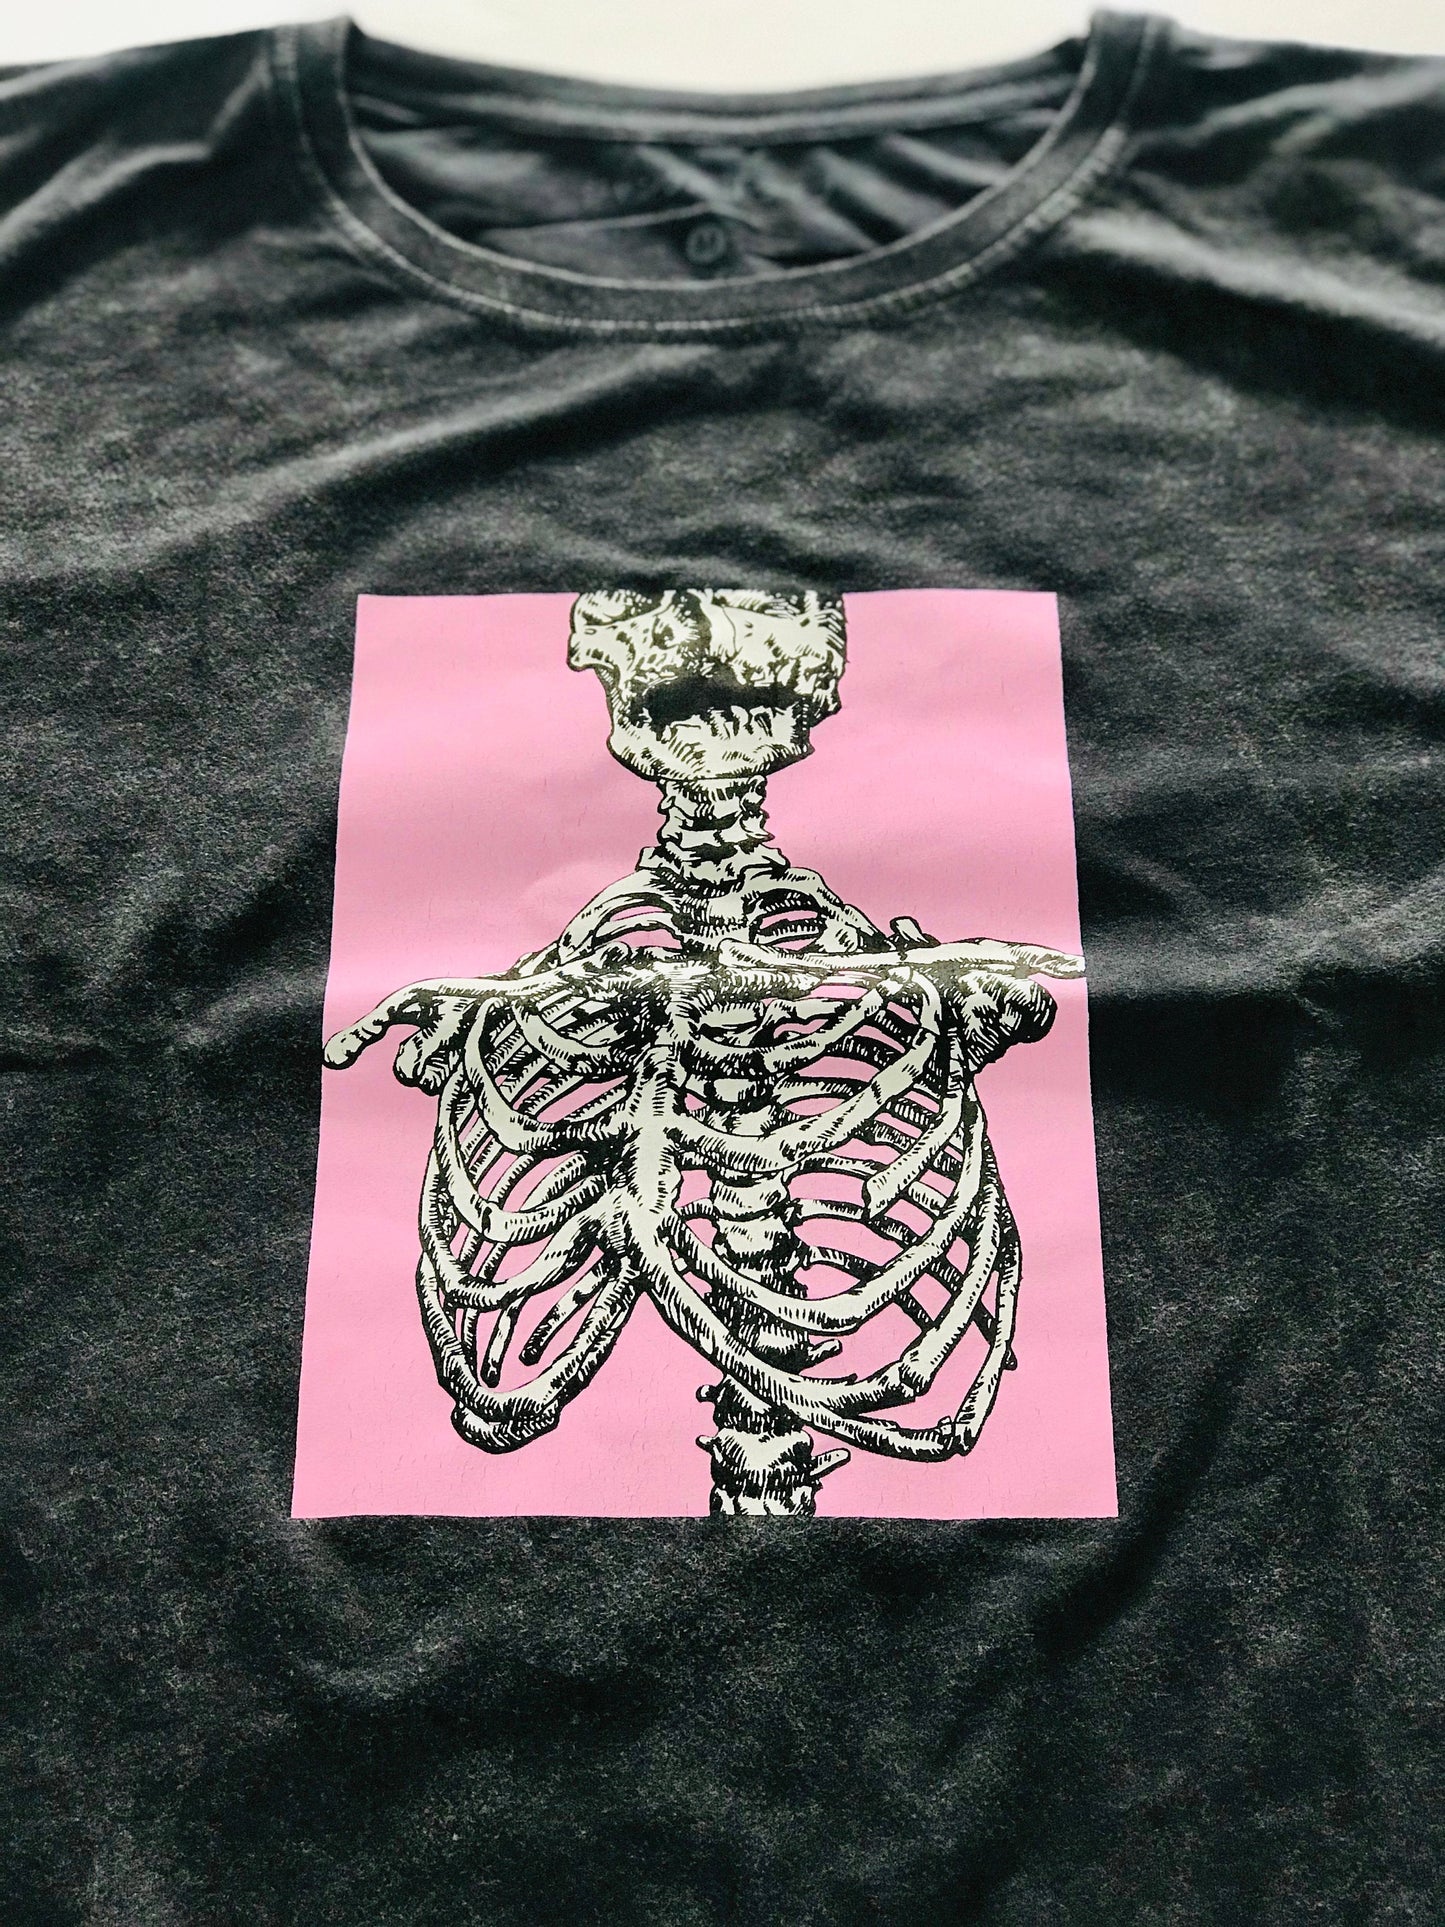 The Ghastly Pink Distressed Unisex Boxy Skeleton Tee Shirt